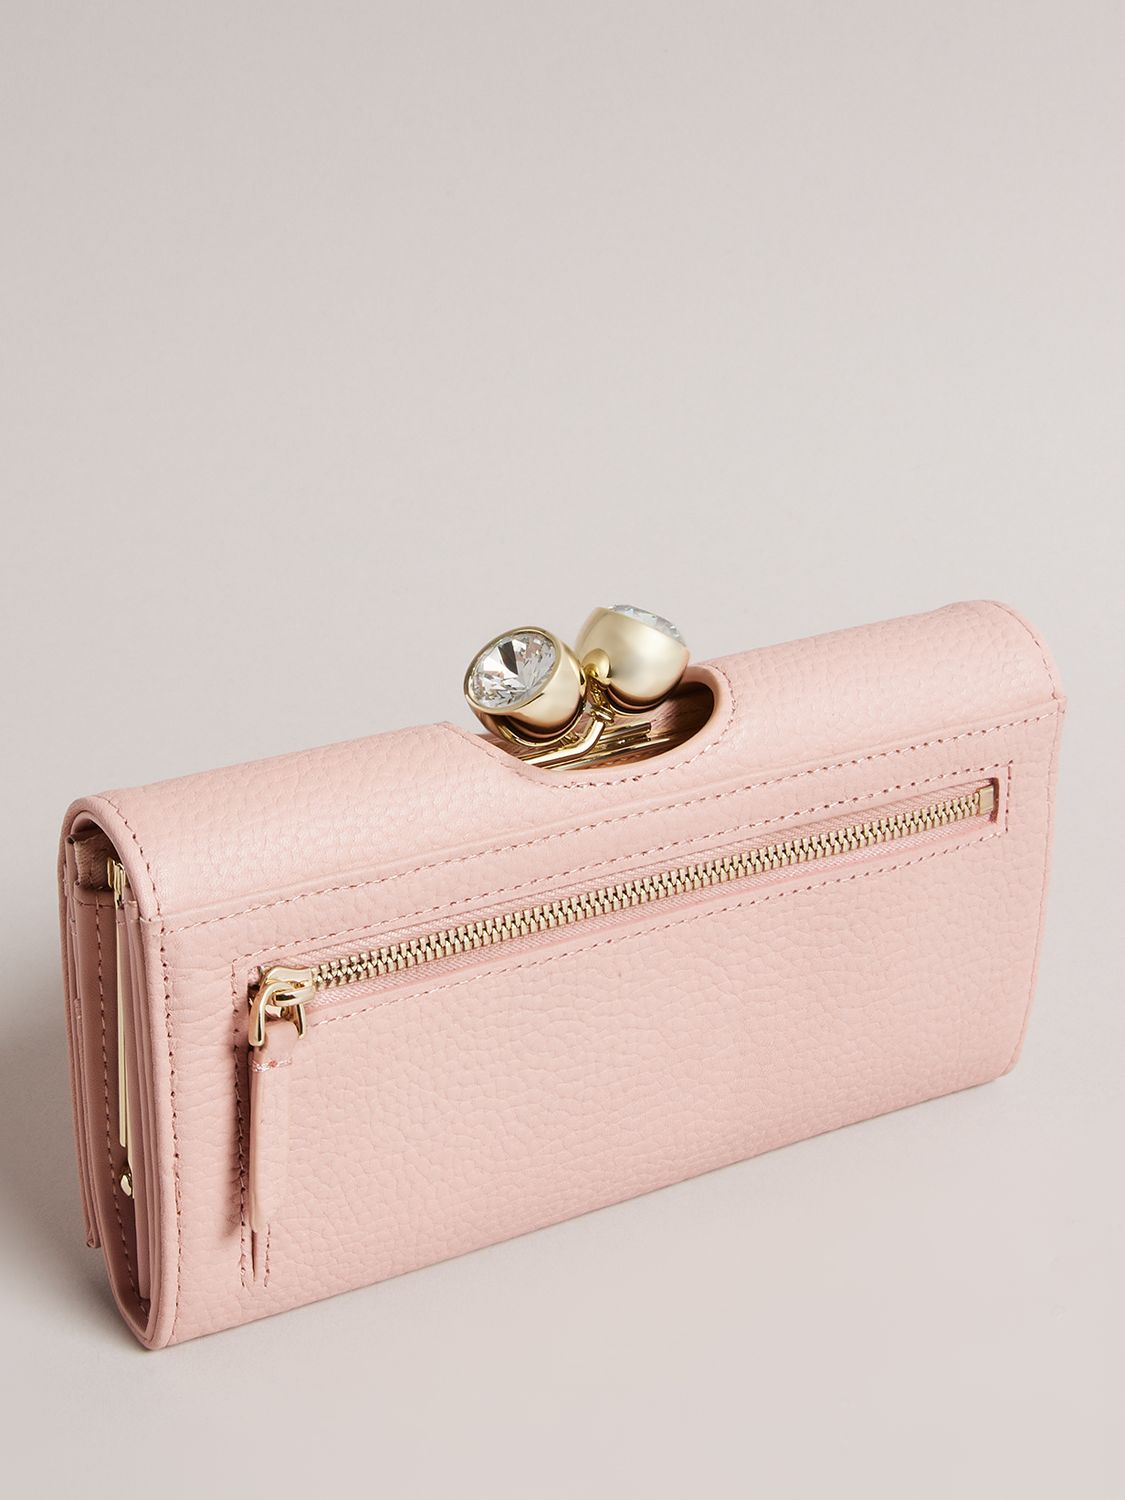 Ted Baker Rosyela Grained Leather Purse, Light Pink, One Size